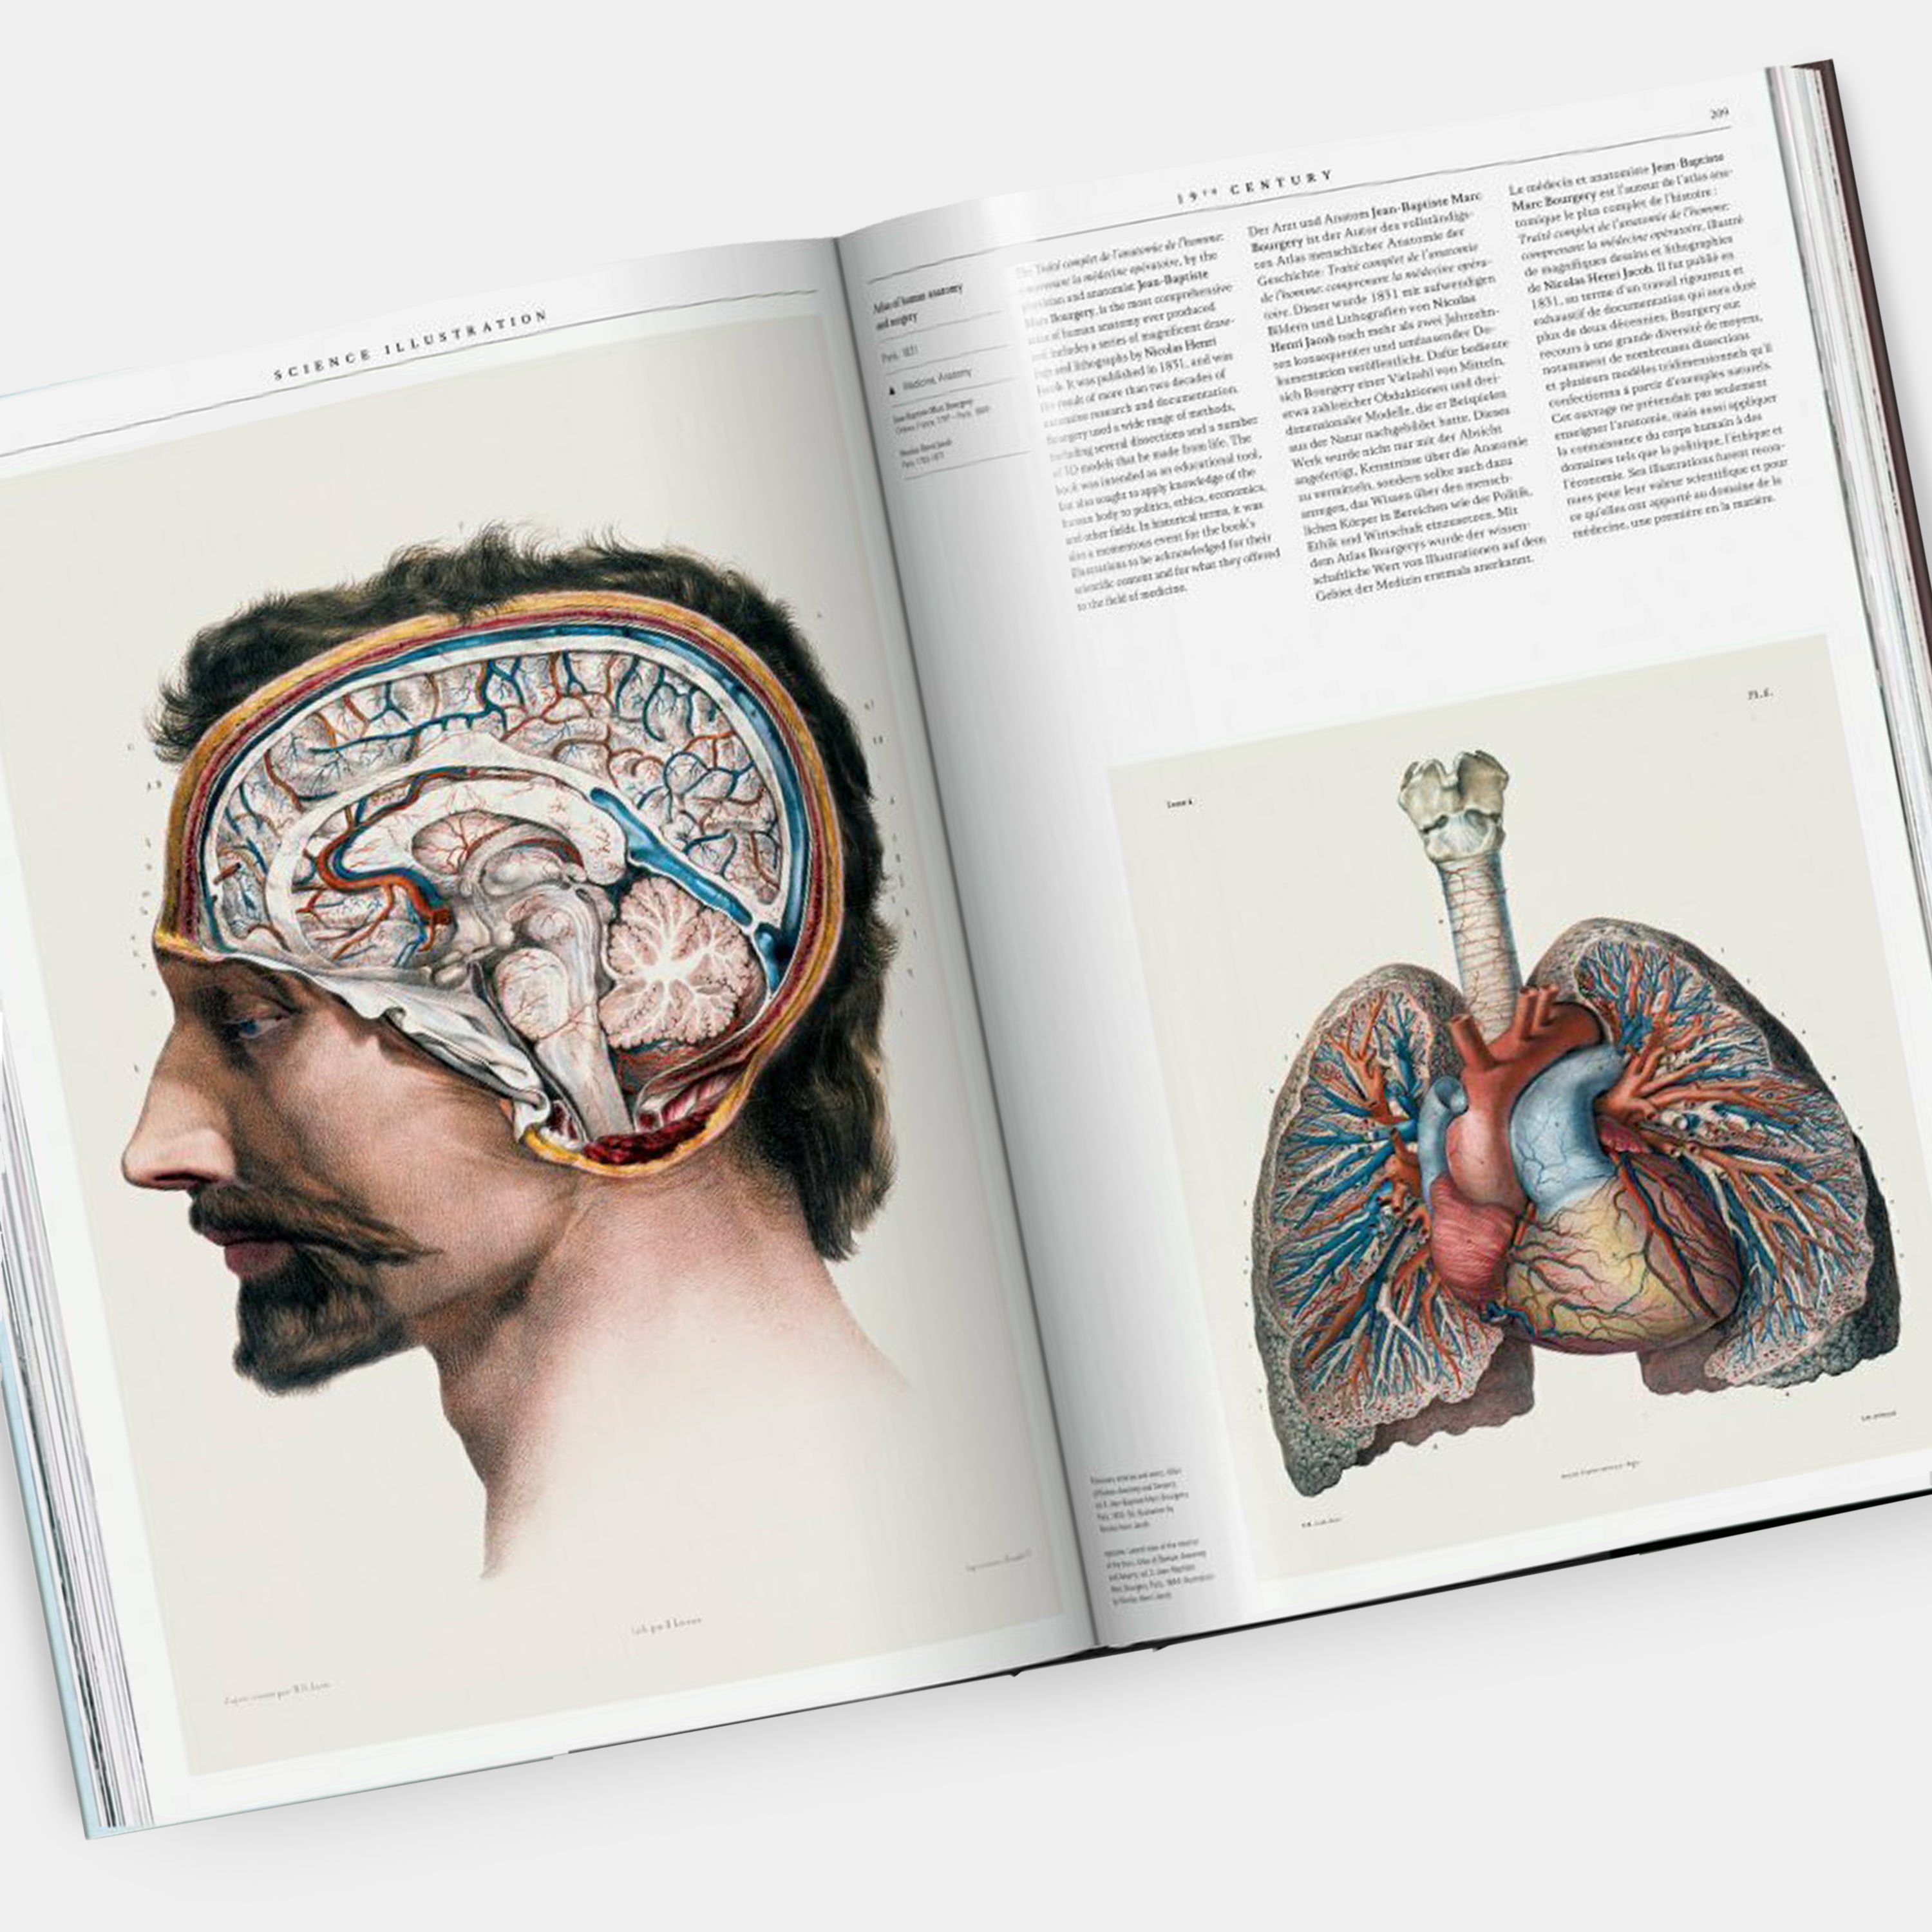 Science Illustration. A History of Visual Knowledge from the 15th Century to Today XL Taschen Book